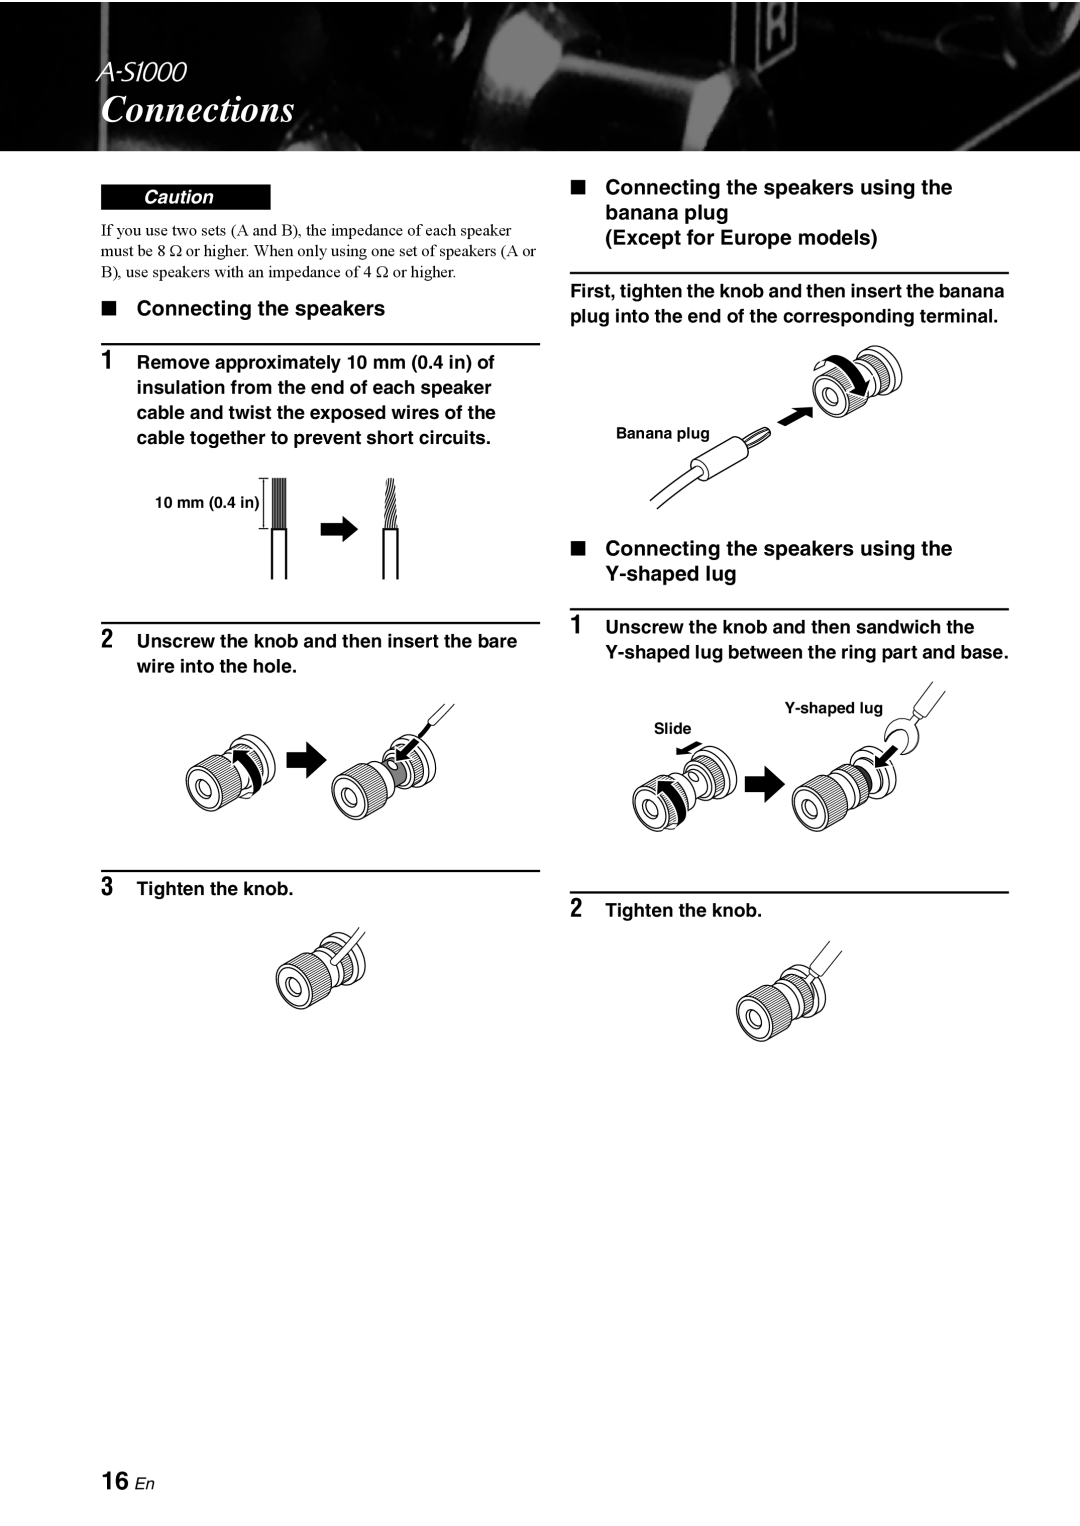 Yamaha A-S1000 owner manual 16 En, Connecting the speakers using the banana plug, Except for Europe models, Connections 